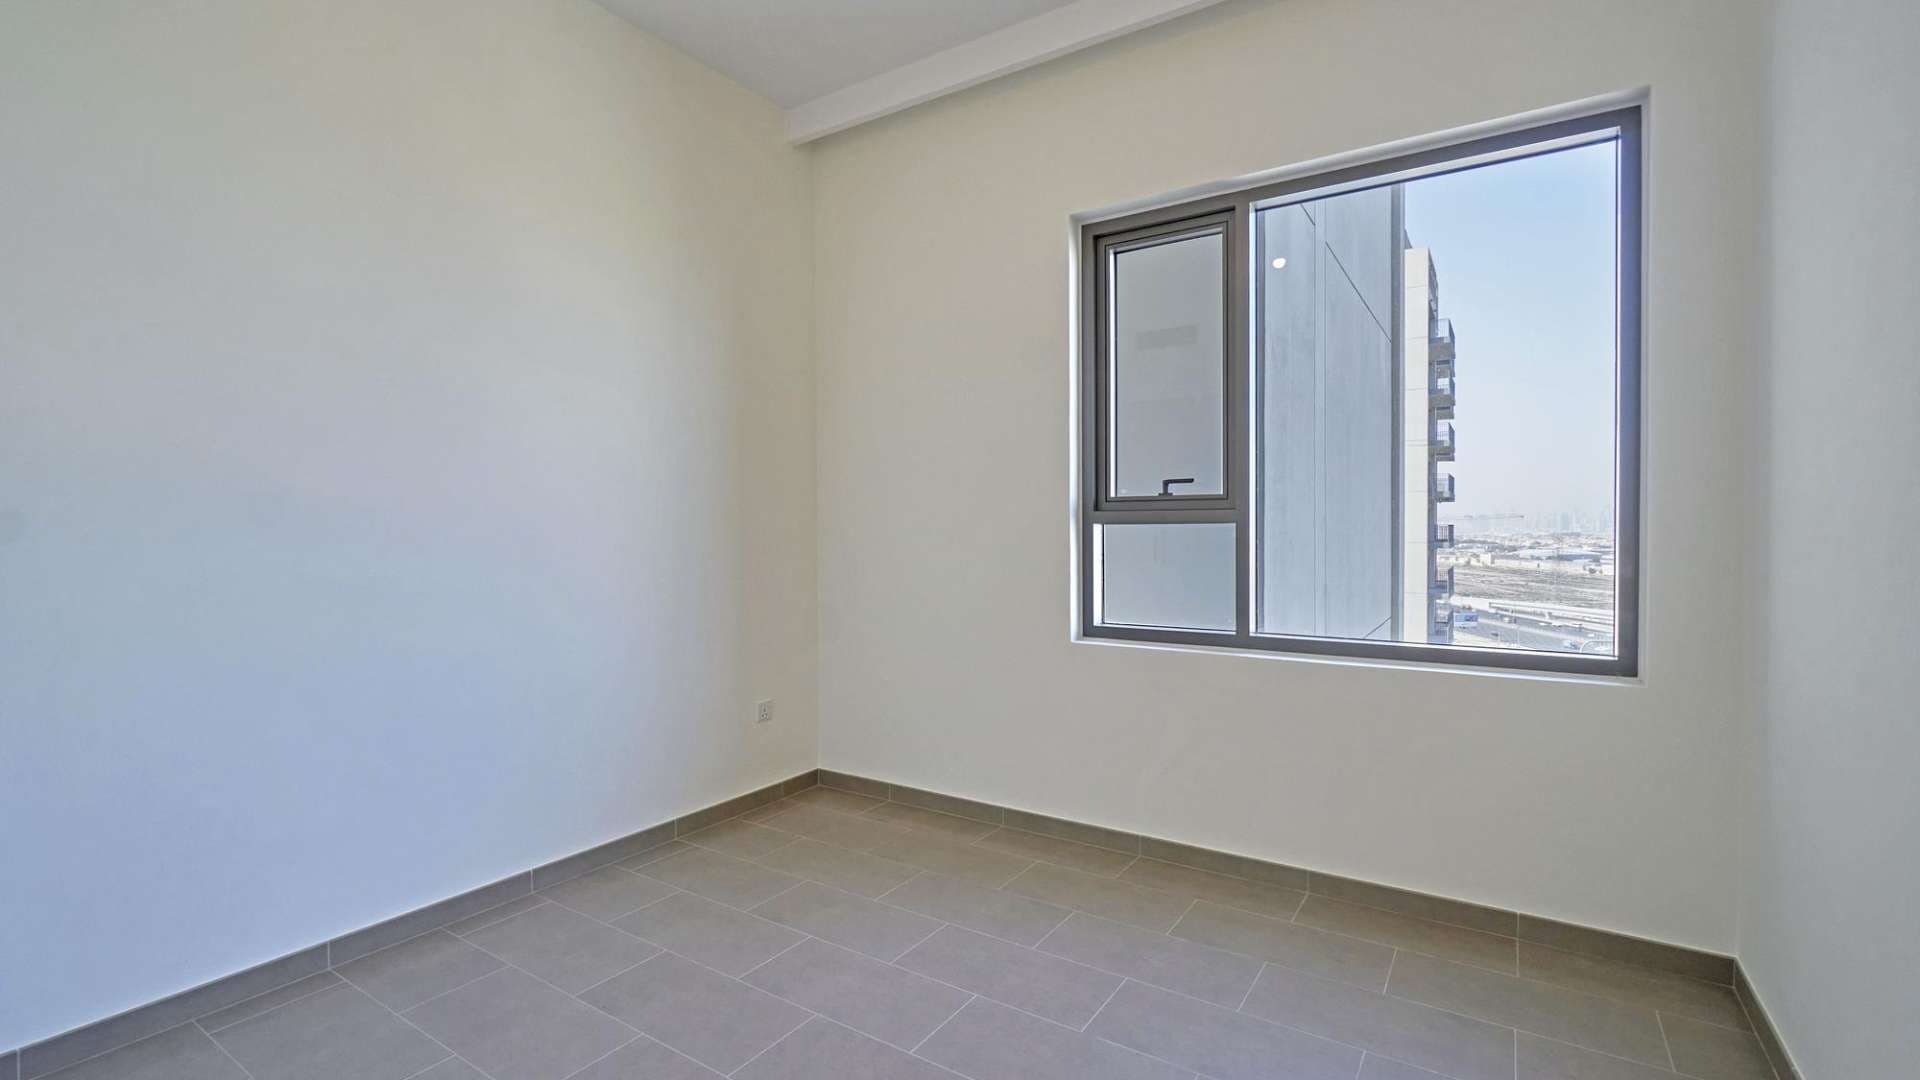 2 Bedroom Apartment For Sale Park Heights Lp07655 36db816f1d27120.jpg